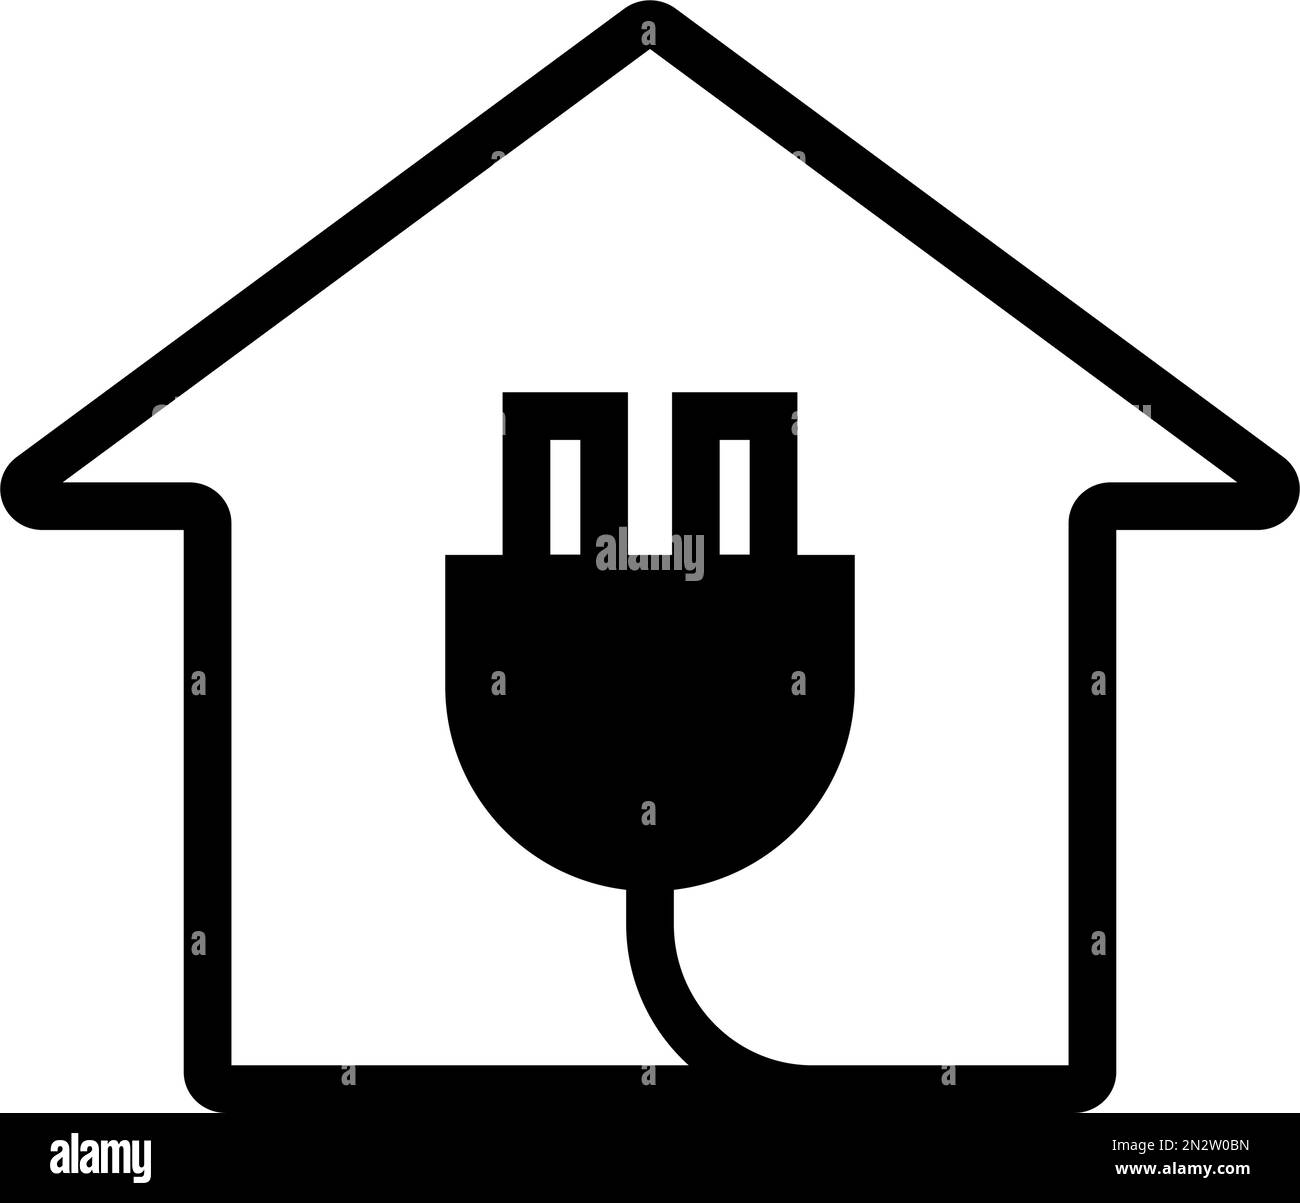 Building and outlet icons. Charging icon. Editable vector. Stock Vector